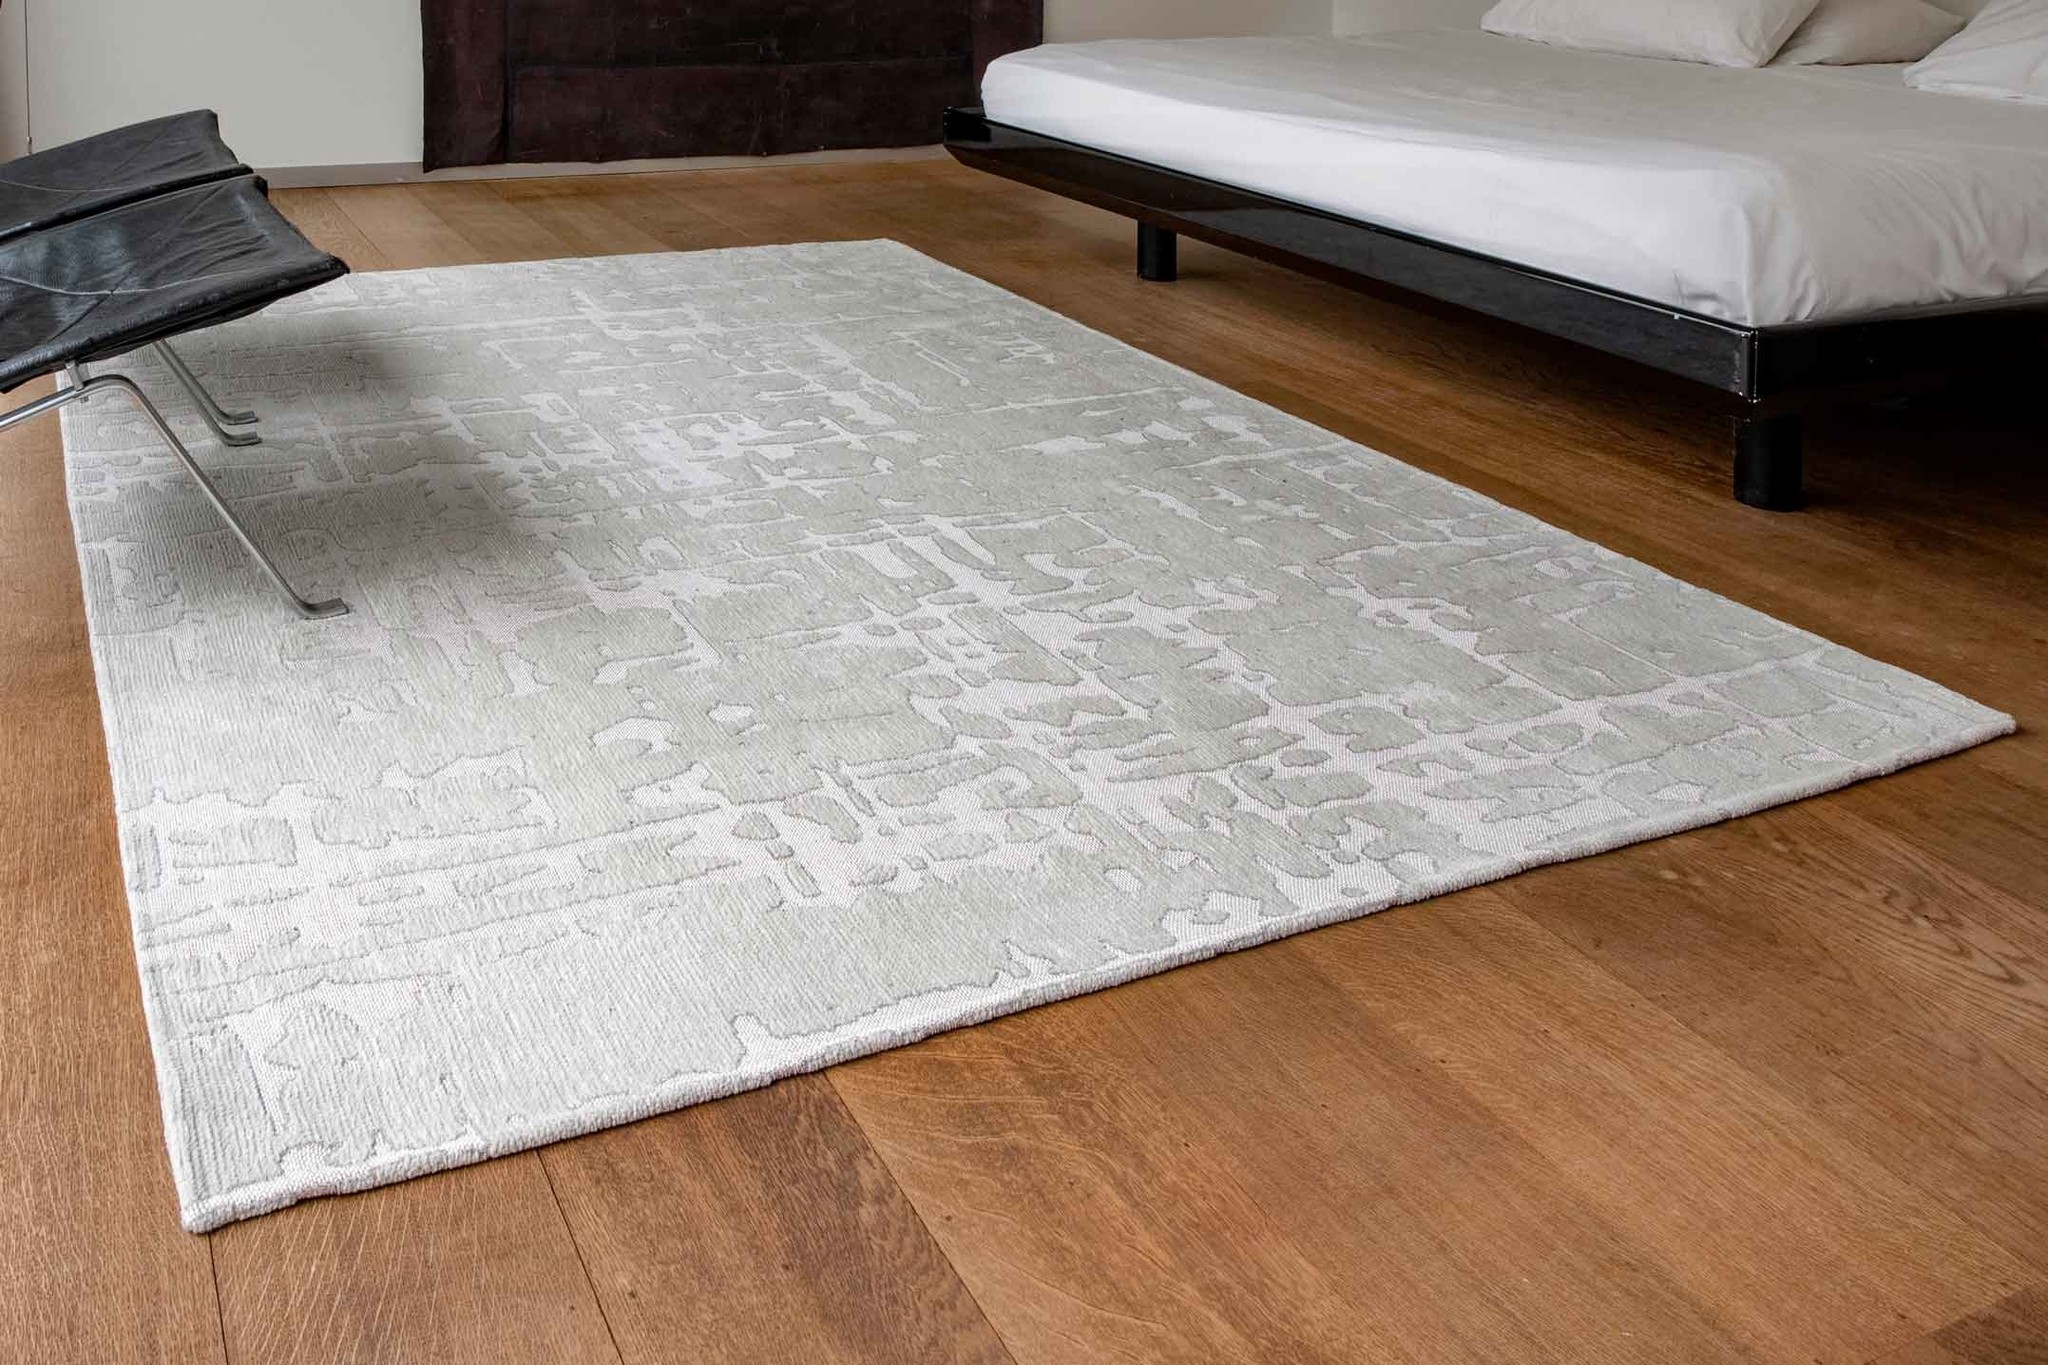 Abstract Silver Belgian Rug ☞ Size: 4' 7" x 6' 7" (140 x 200 cm)